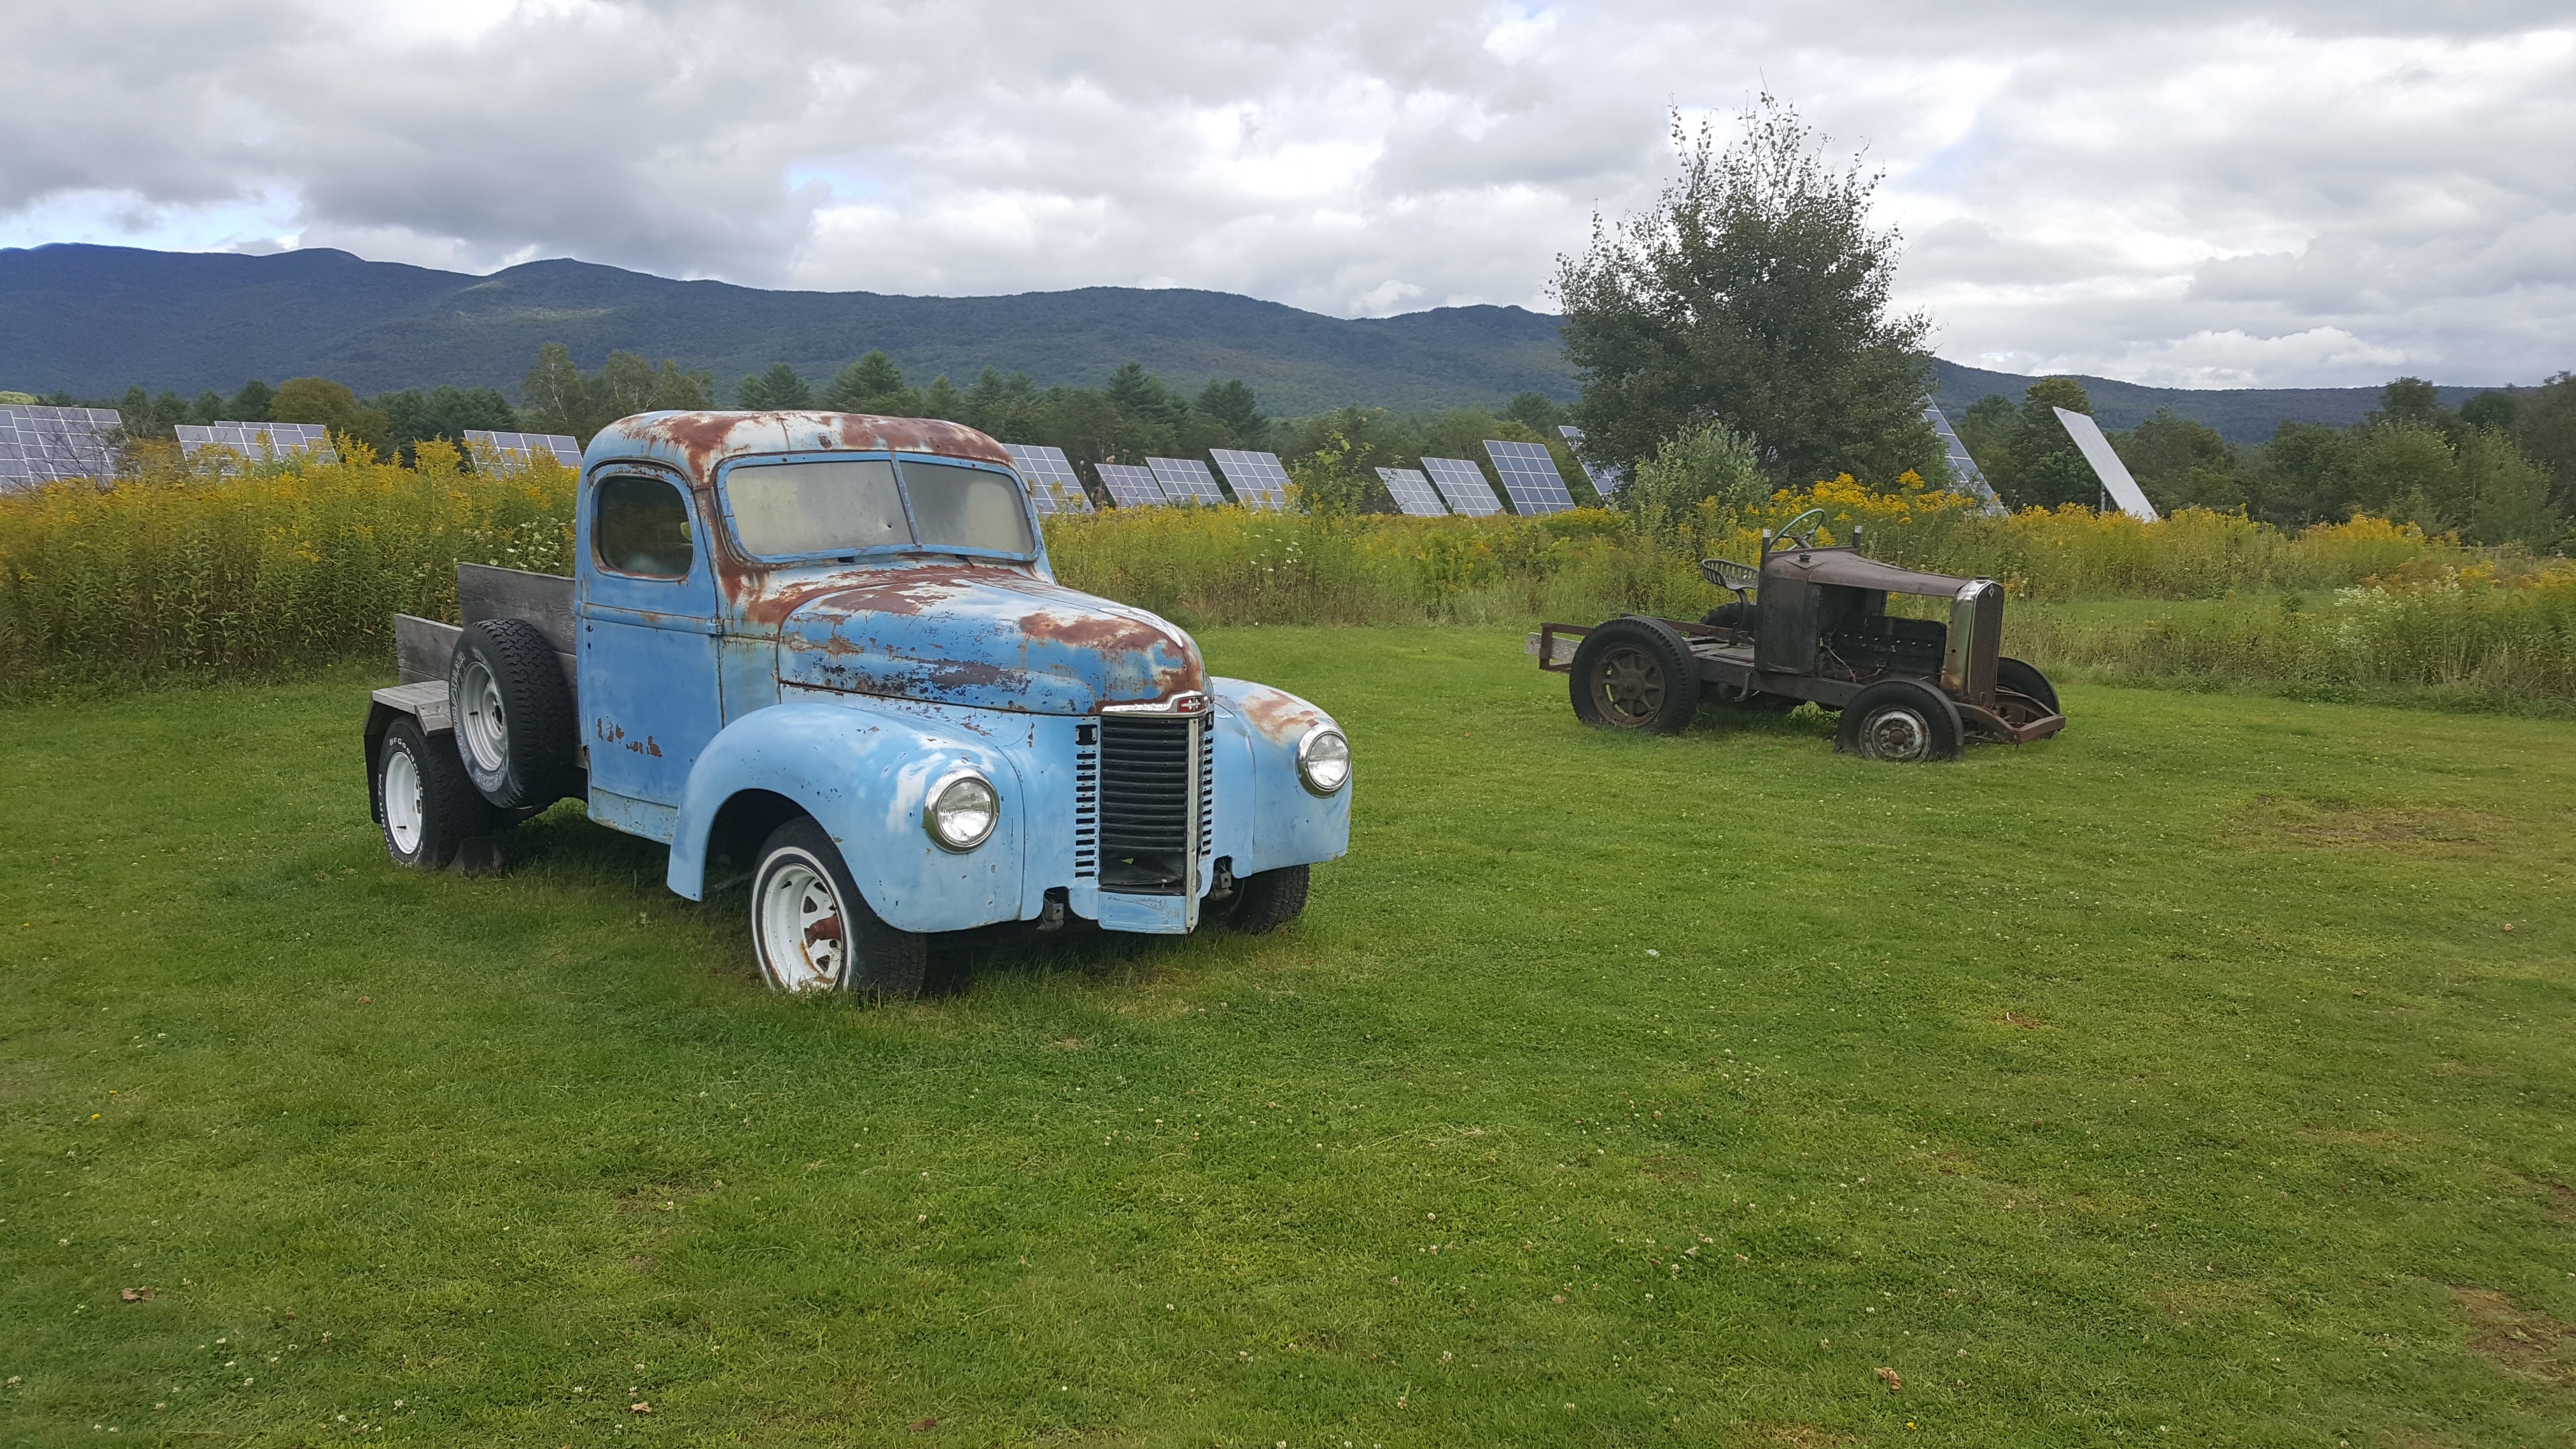 Vintage truck and tractor out back of cider mill in Stowe, VT!  #Adventure